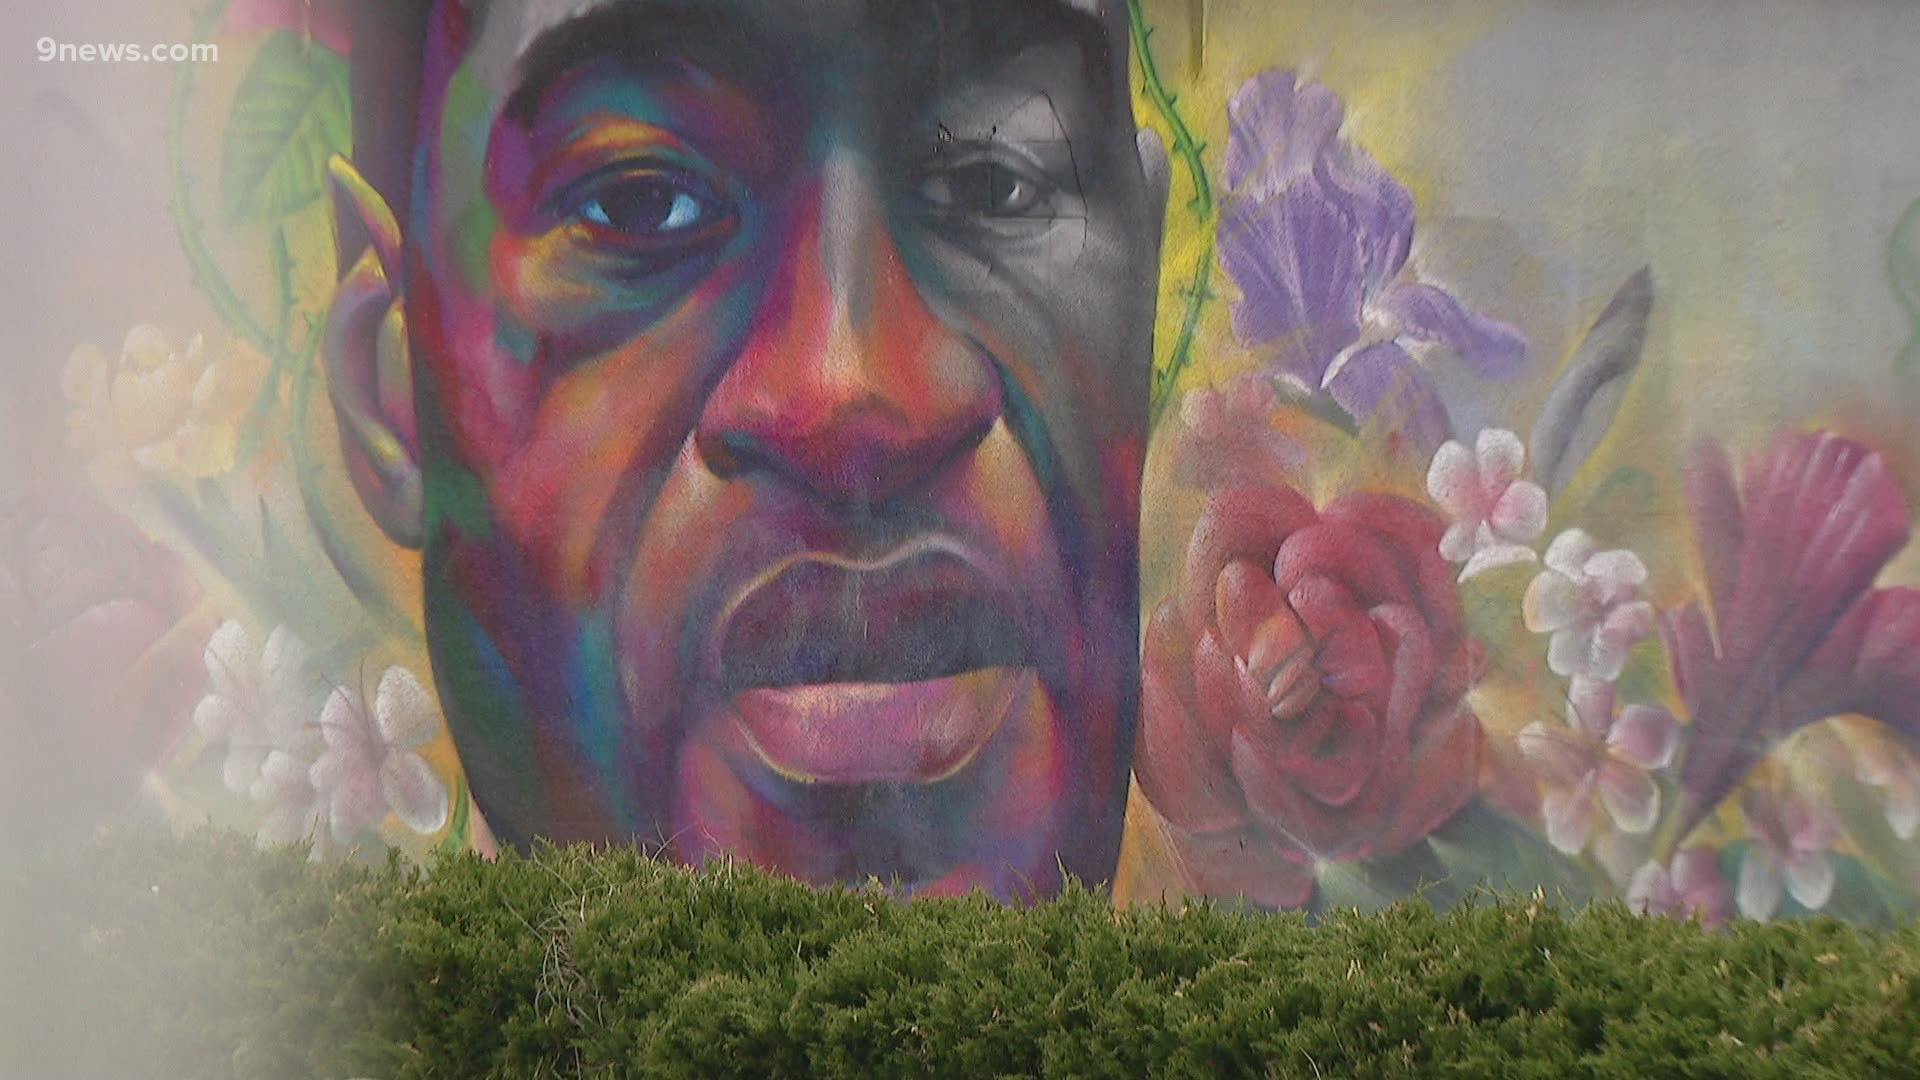 A mural of George Floyd in Denver has become a place of quiet reflection. Many visited a day after Derek Chauvin was convicted of Floyd's murder in Minneapolis.